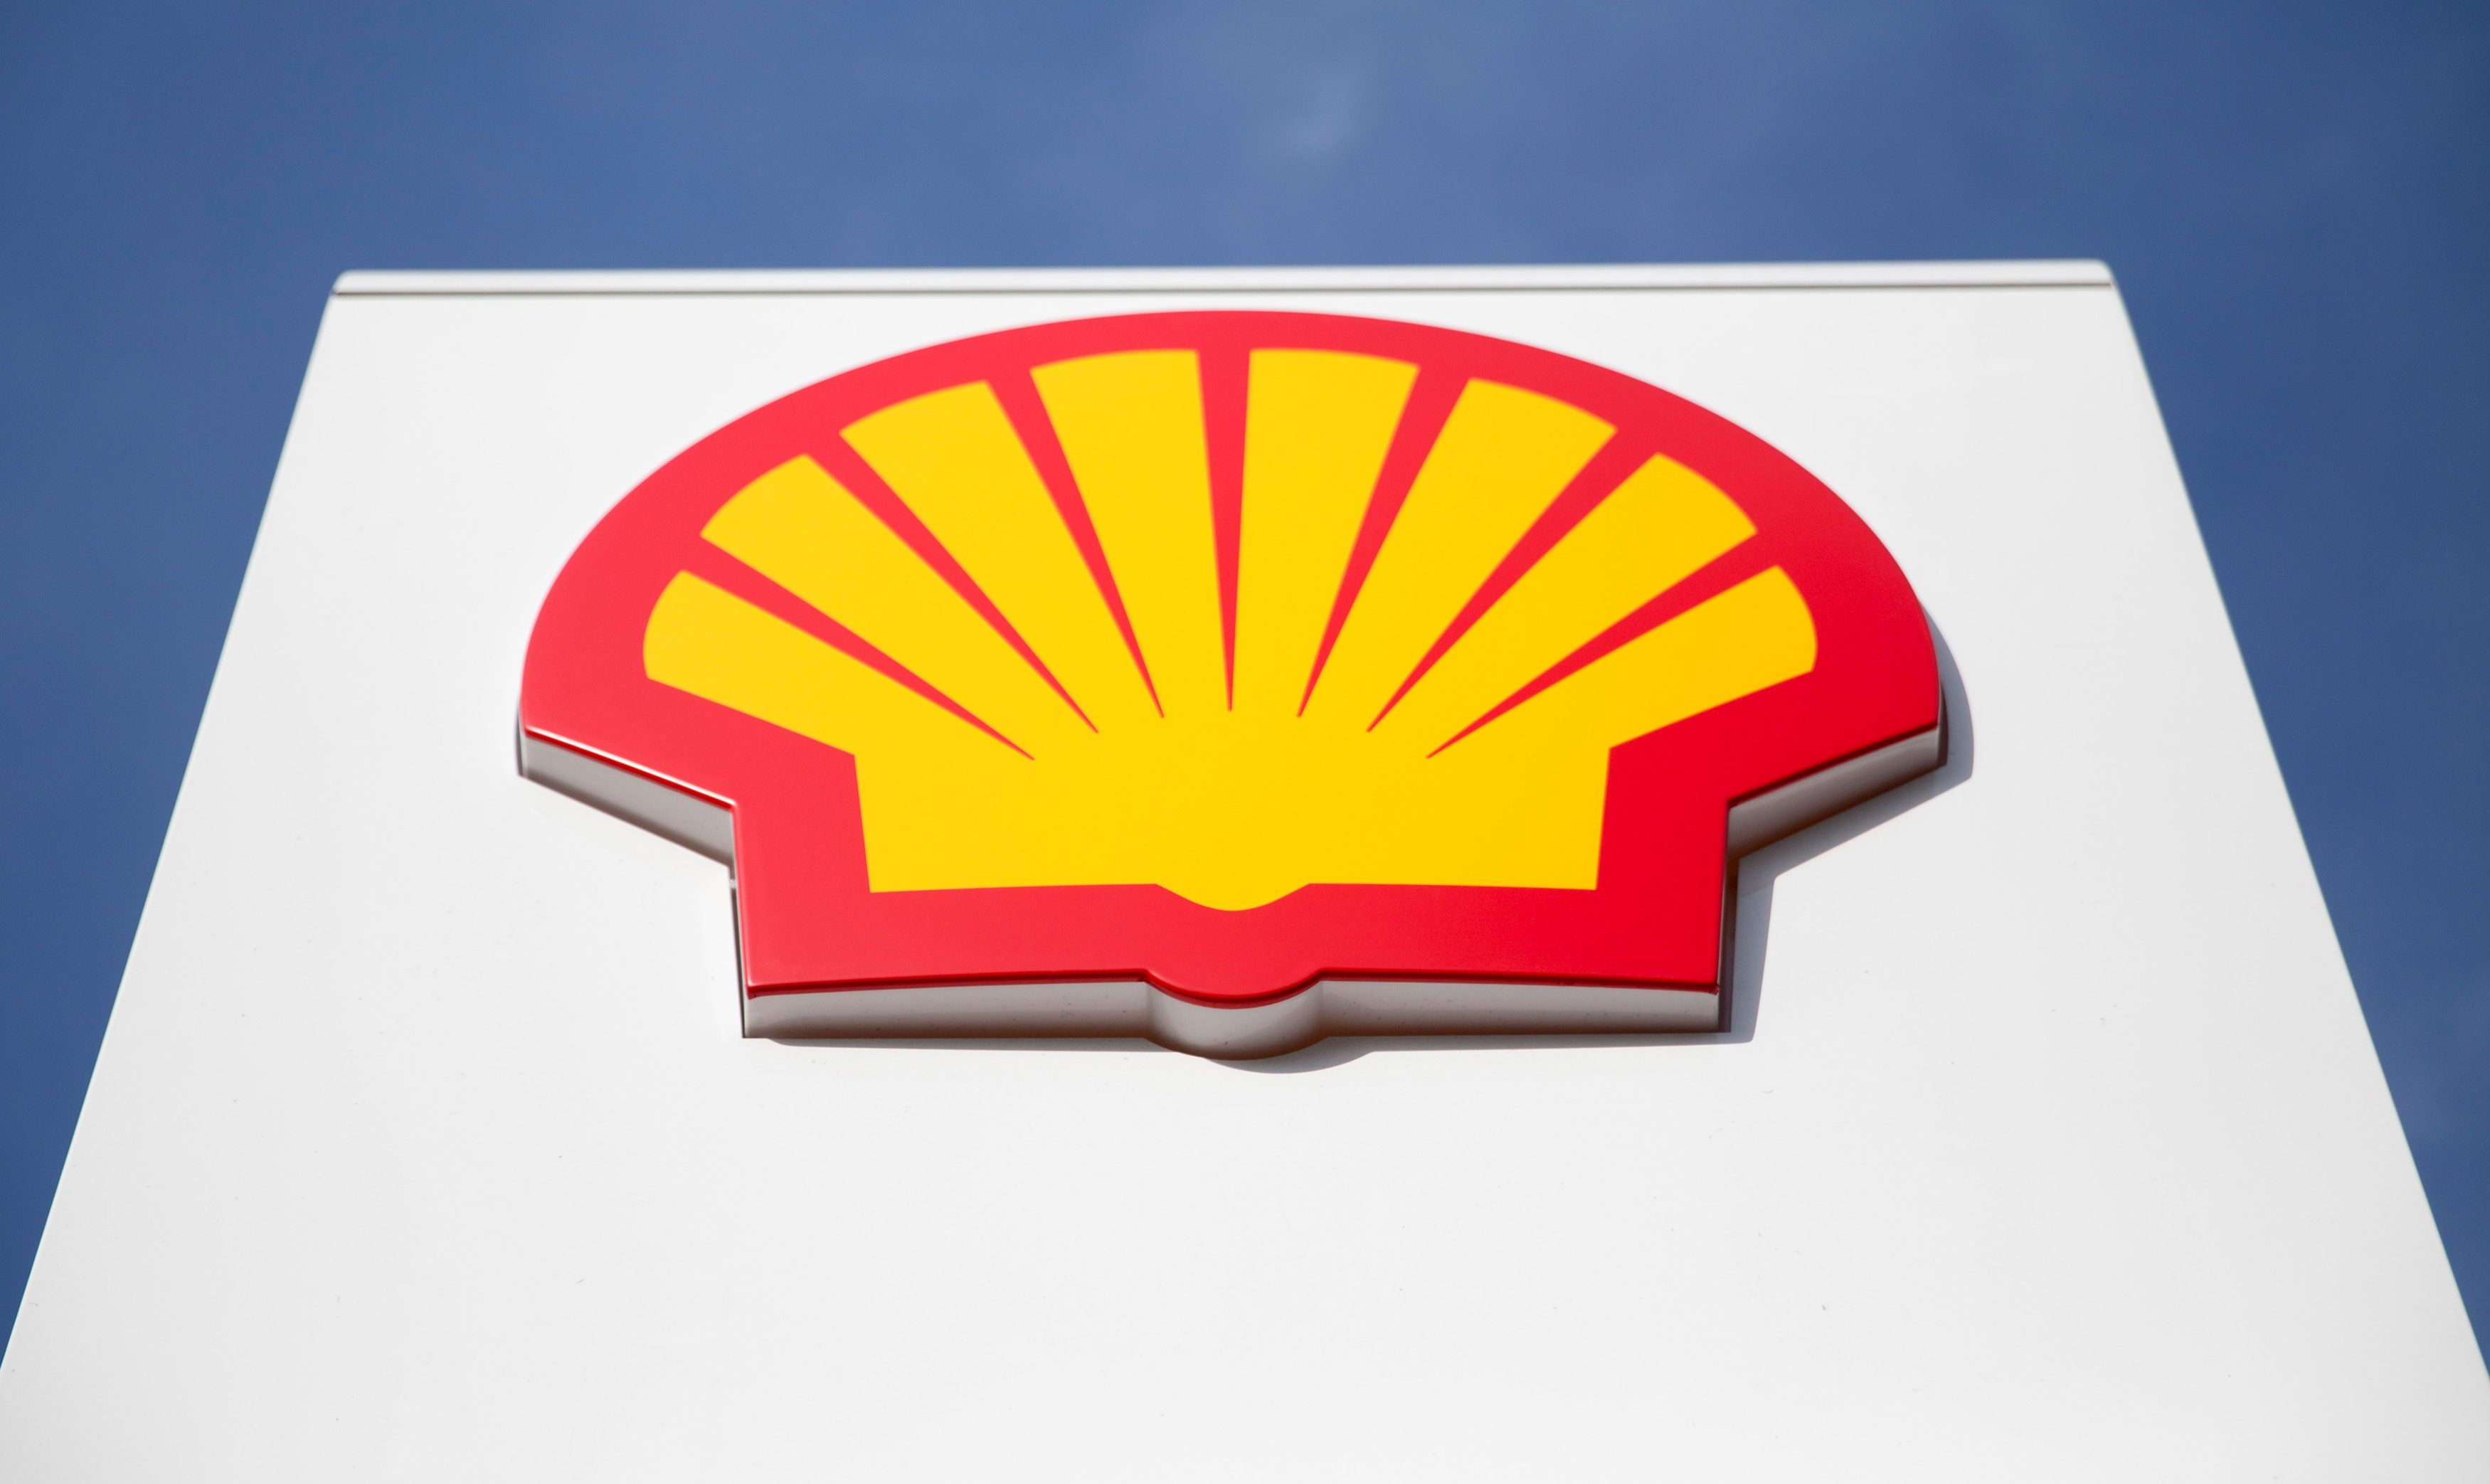 Shell launches shareholder talks to win backing for HQ move, sources say